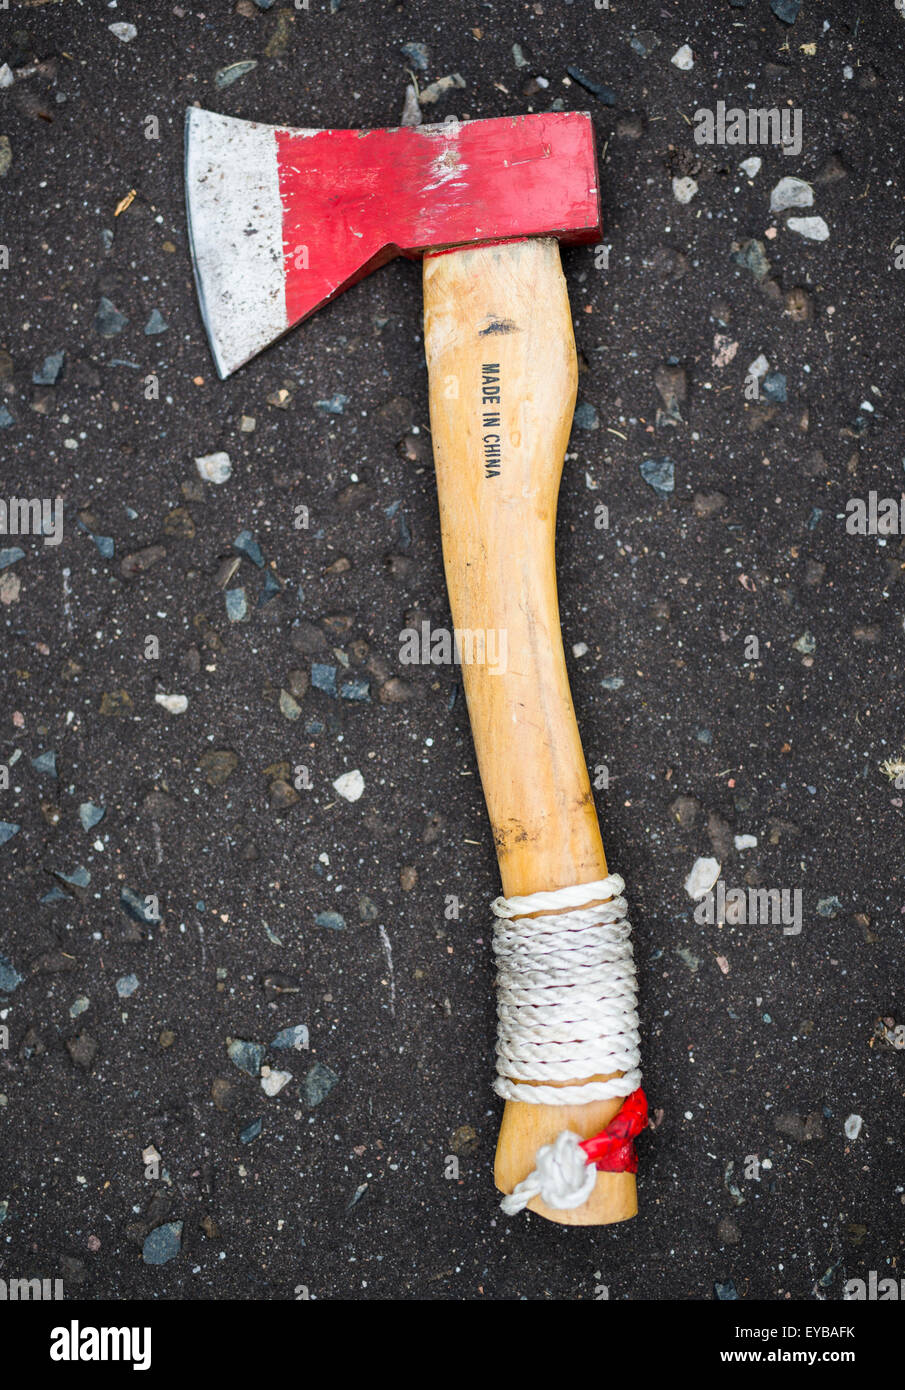 An Axe lies on the pavement, Stock Photo